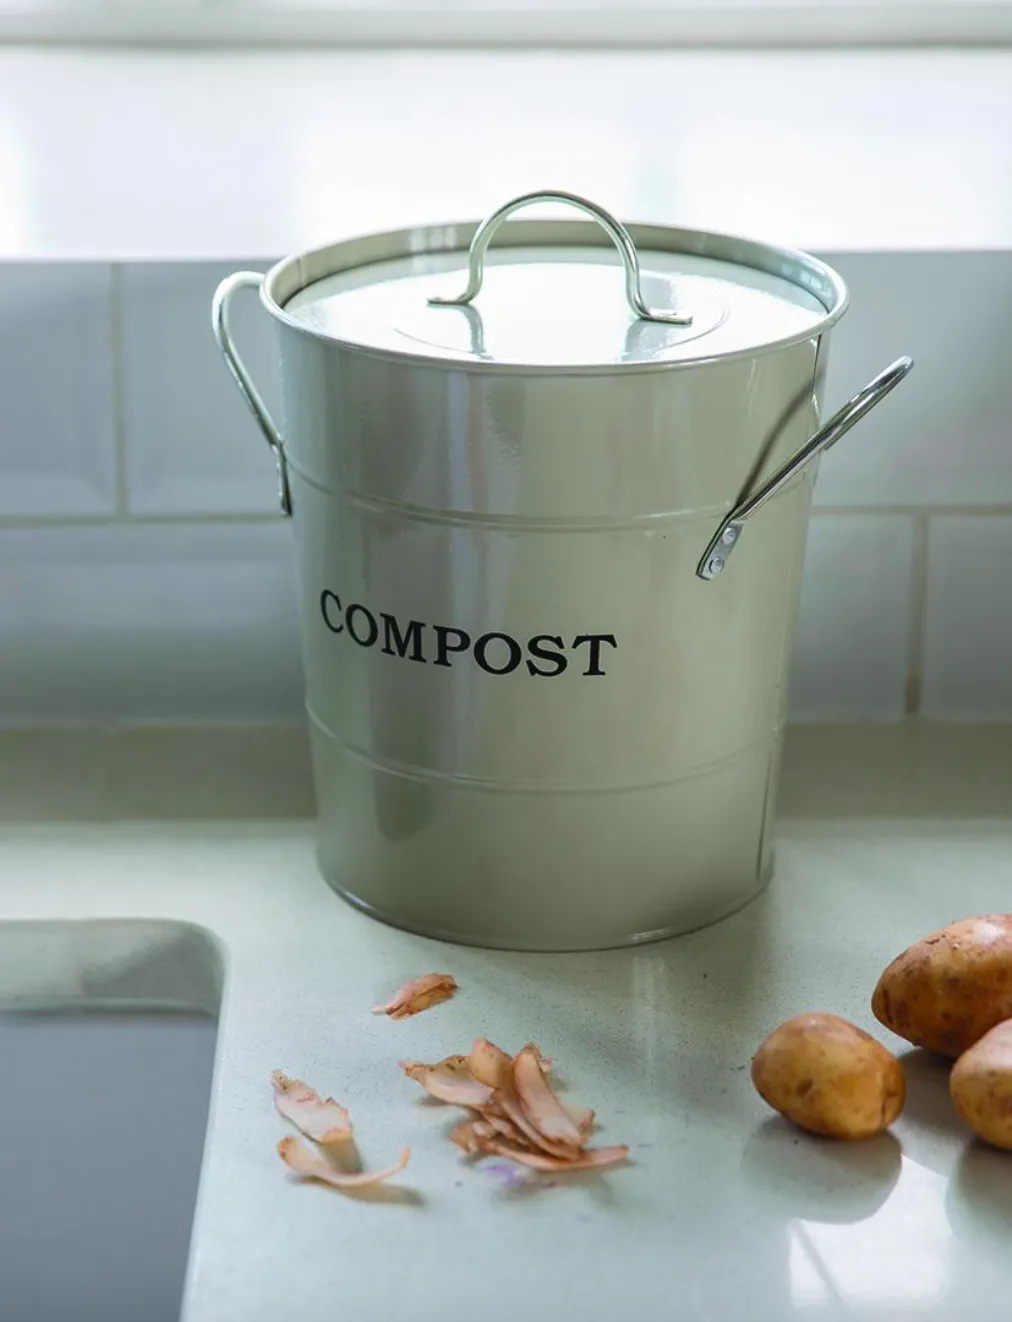 Garden Trading’s 3.5L compost bucket in Clay finish, £20, is a practical and stylish buy for the kitchen worktop